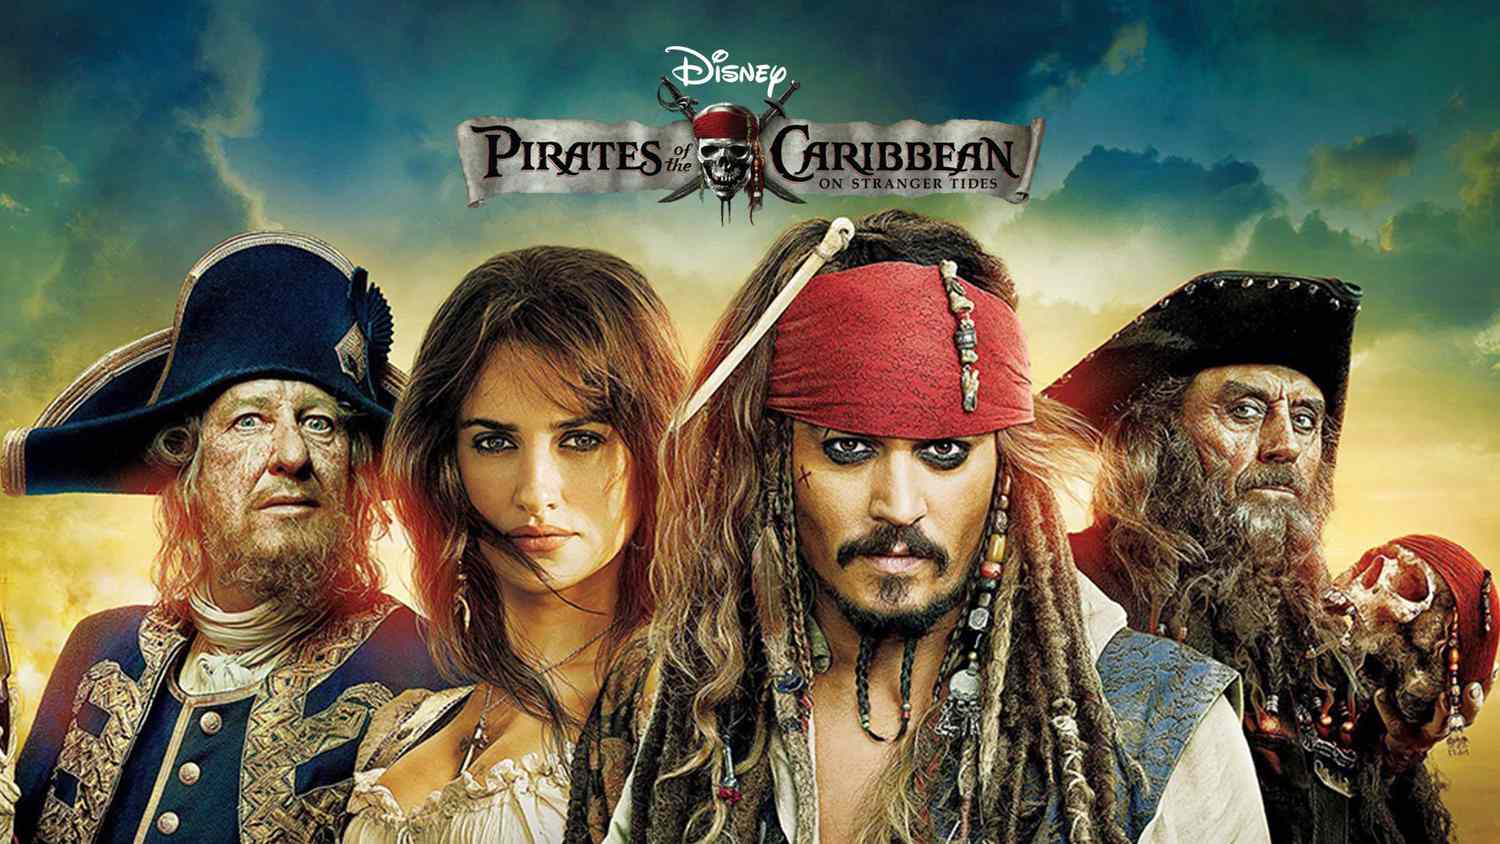 ashley marie nichols recommends pirates full movie online pic